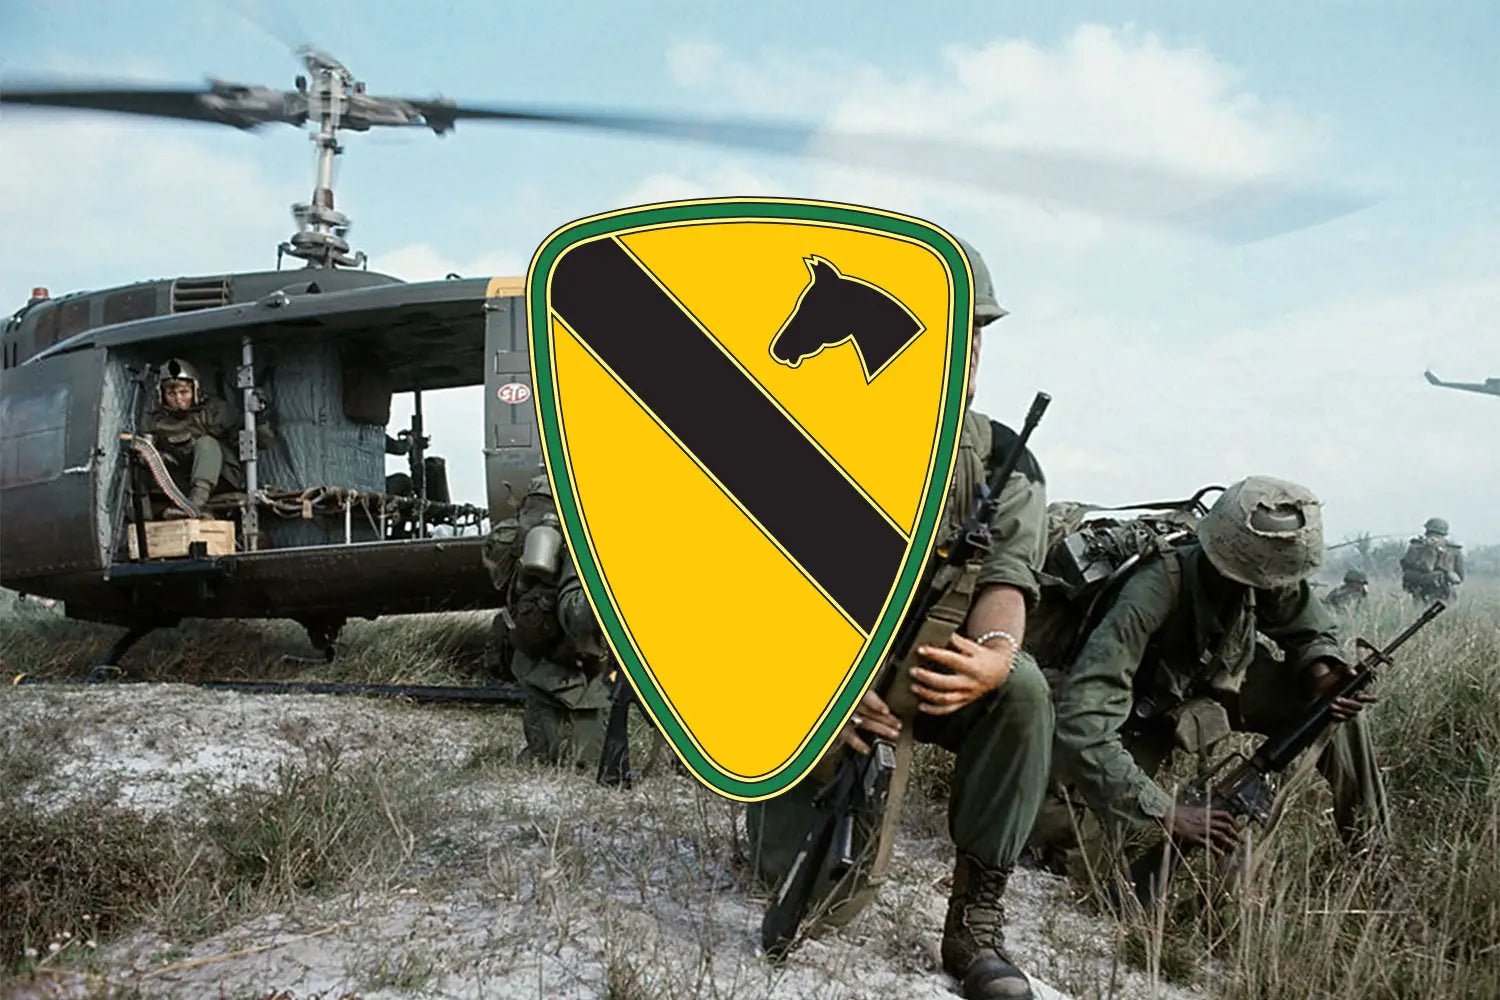 The U.S. Army 1st Cavalry Division: Exploring the History of the "First Team" Nickname - Tactically Acquired